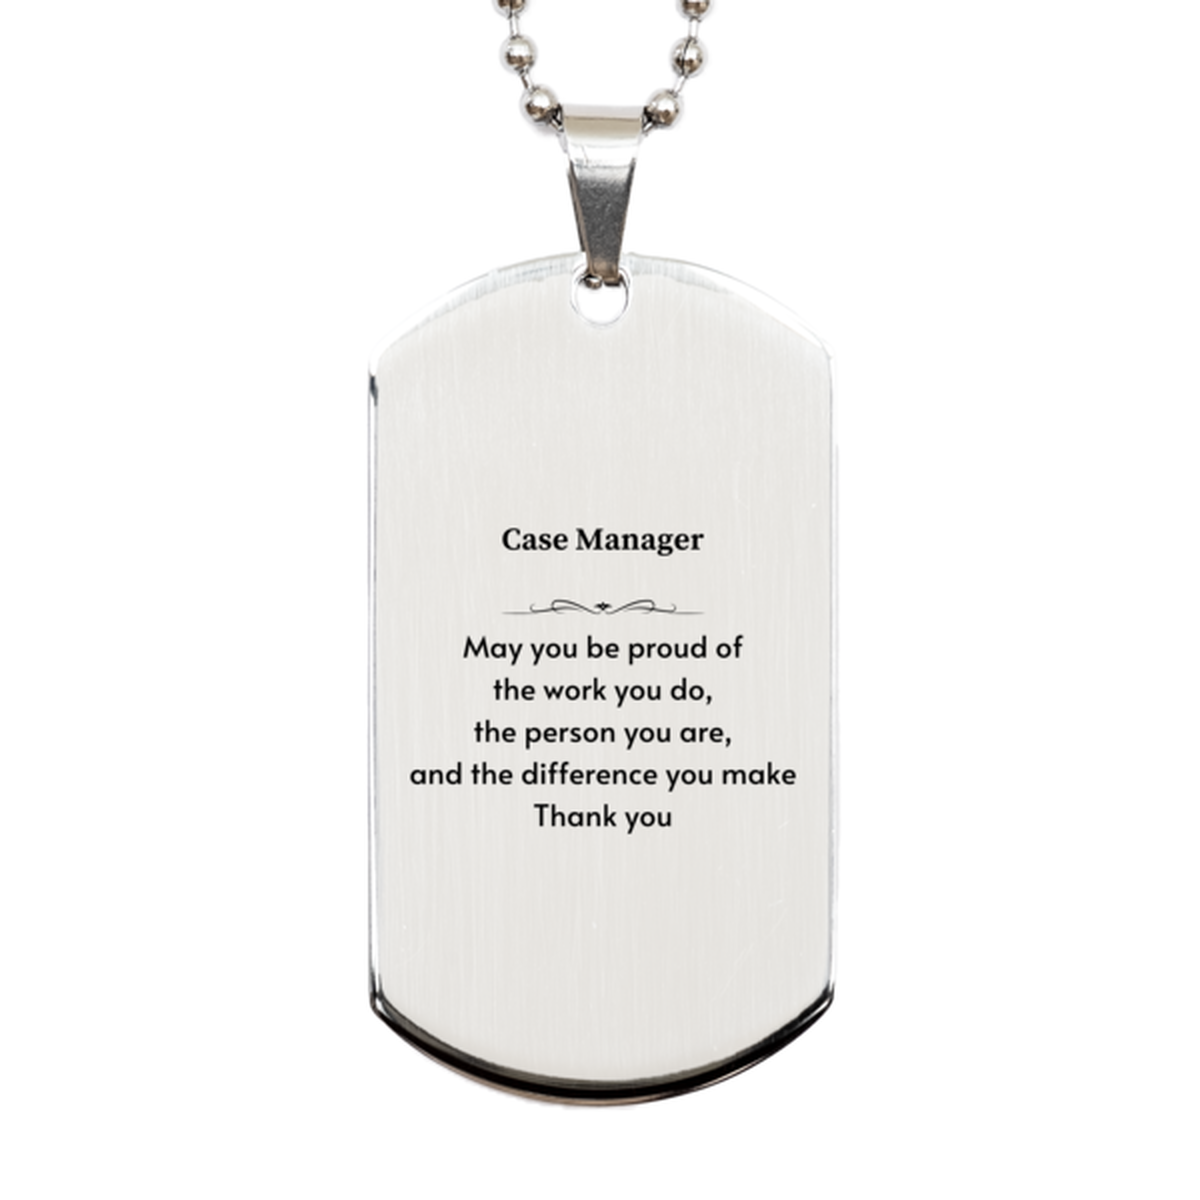 Heartwarming Silver Dog Tag Retirement Coworkers Gifts for Case Manager, Case Manager May You be proud of the work you do, the person you are Gifts for Boss Men Women Friends